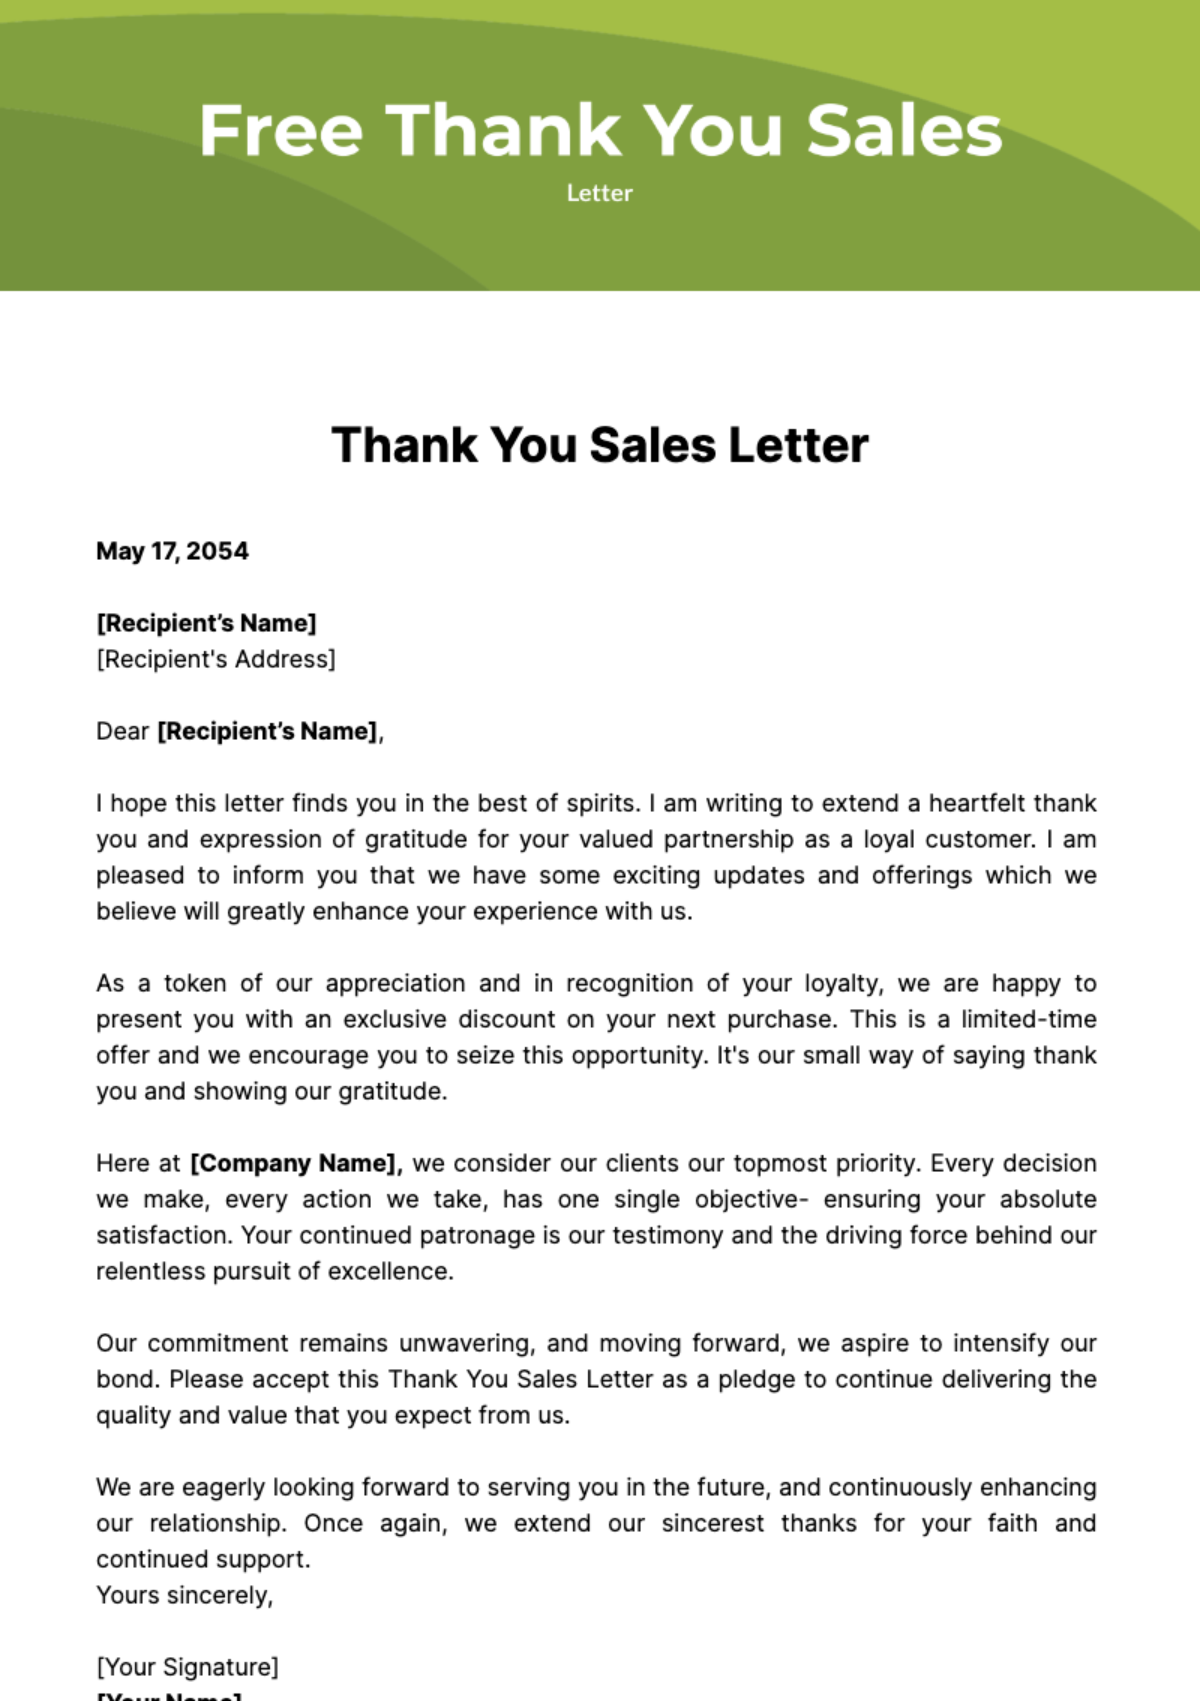 Thank You Sales Letter Template